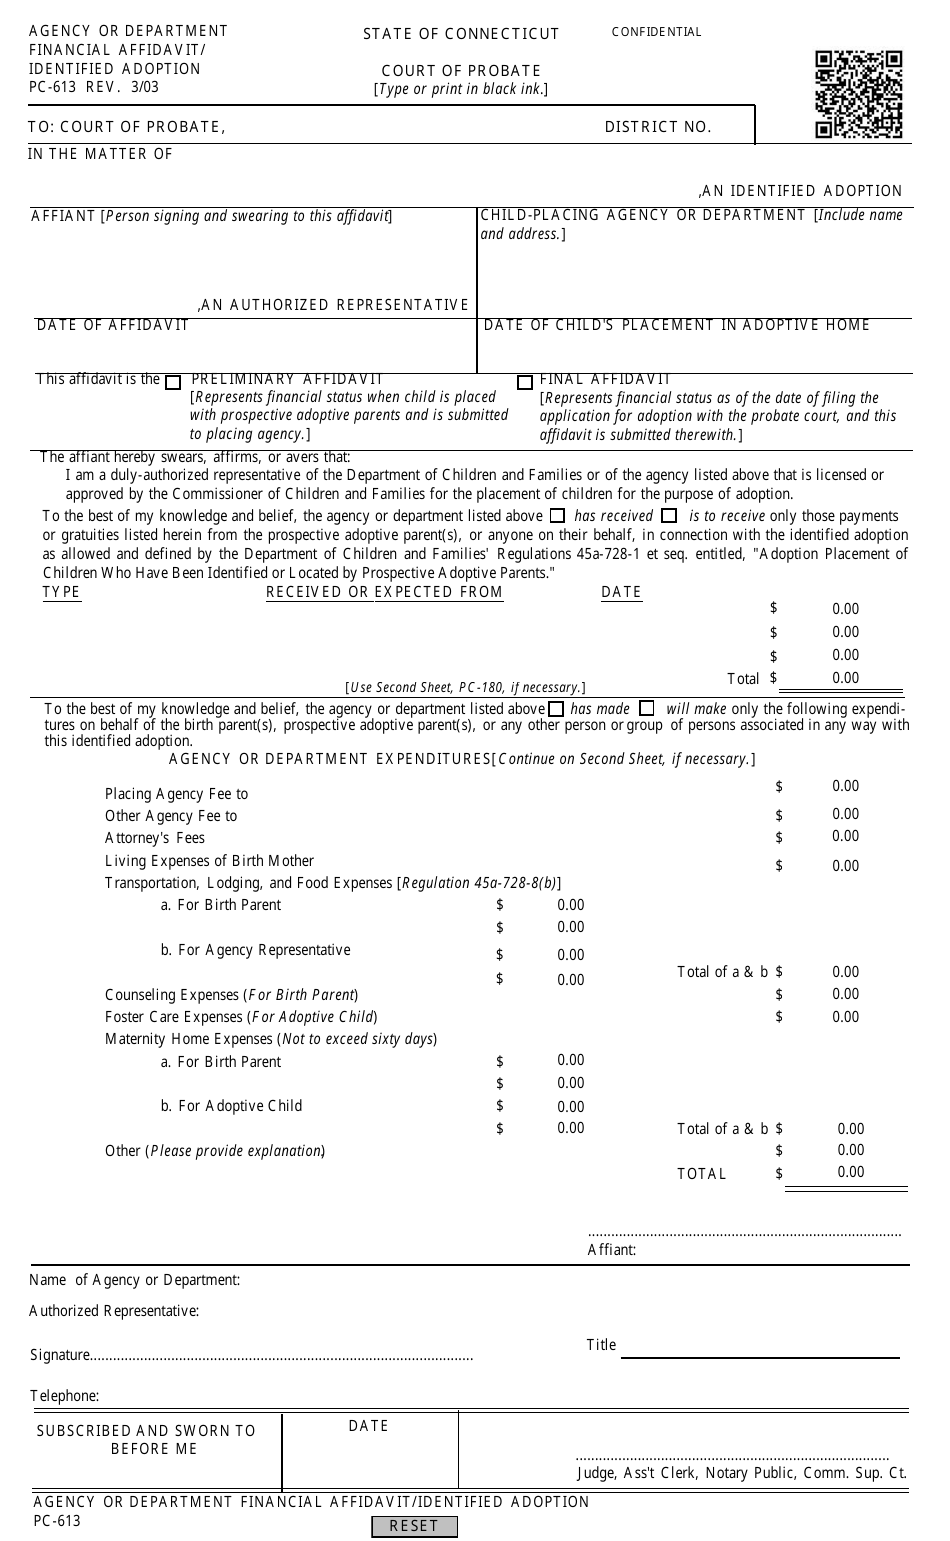 Form PC-613 Agency or Department Financial Affidavit / Identified Adoption - Connecticut, Page 1